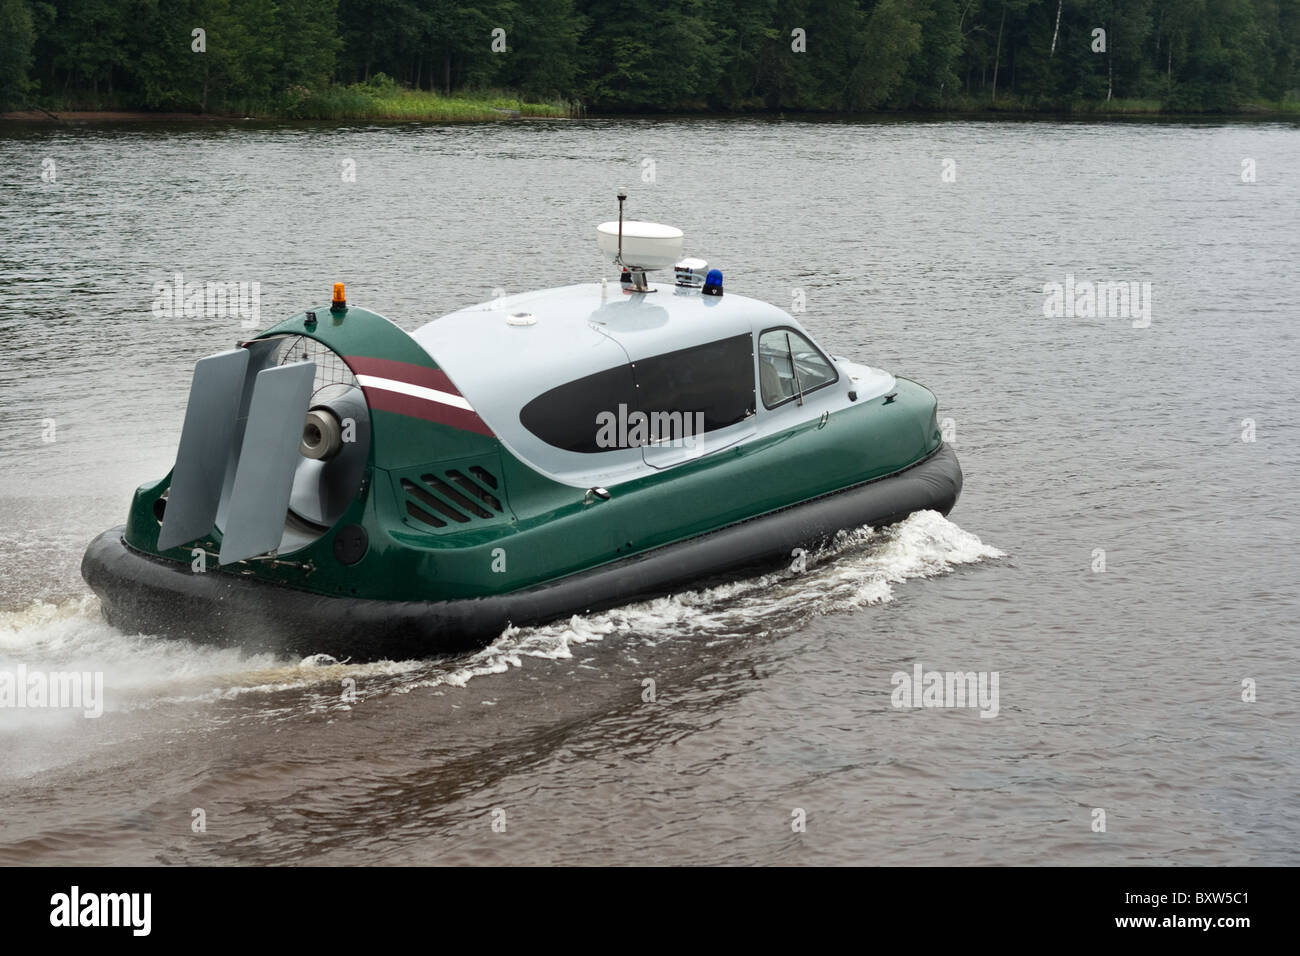 Air-cushion boat on high speed. Stock Photo